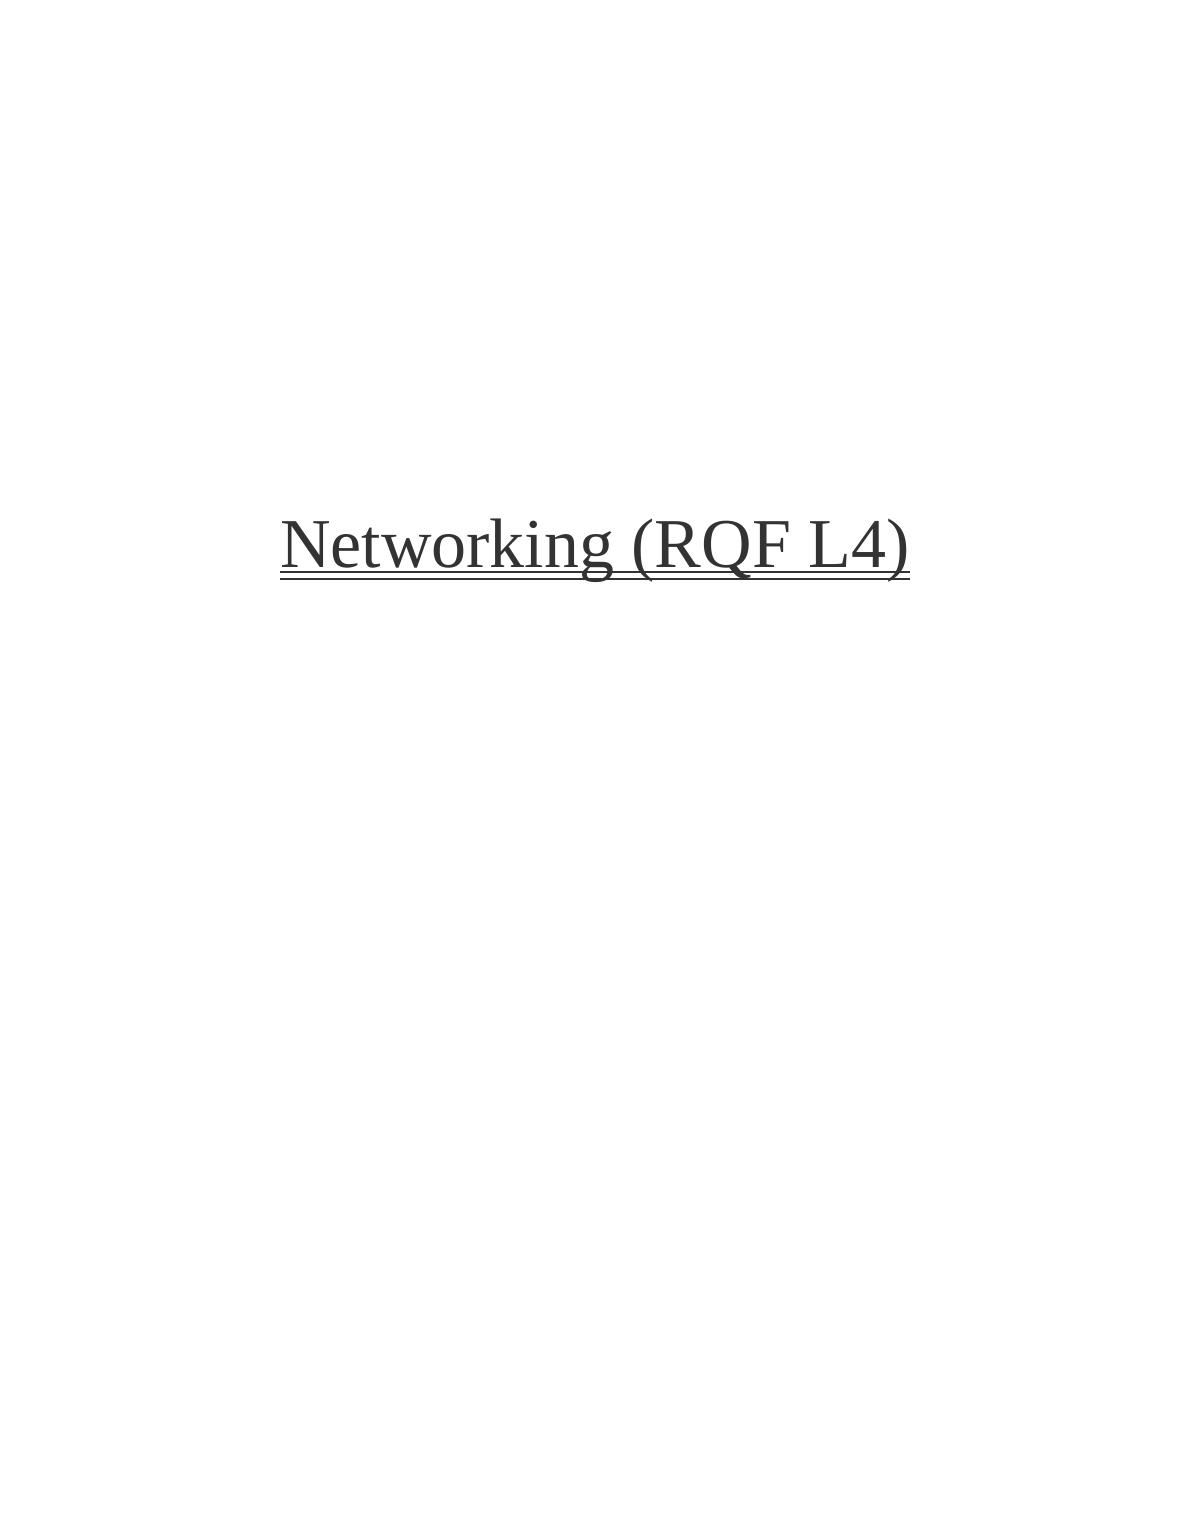 Report on Implementing New Network Infrastructure_1